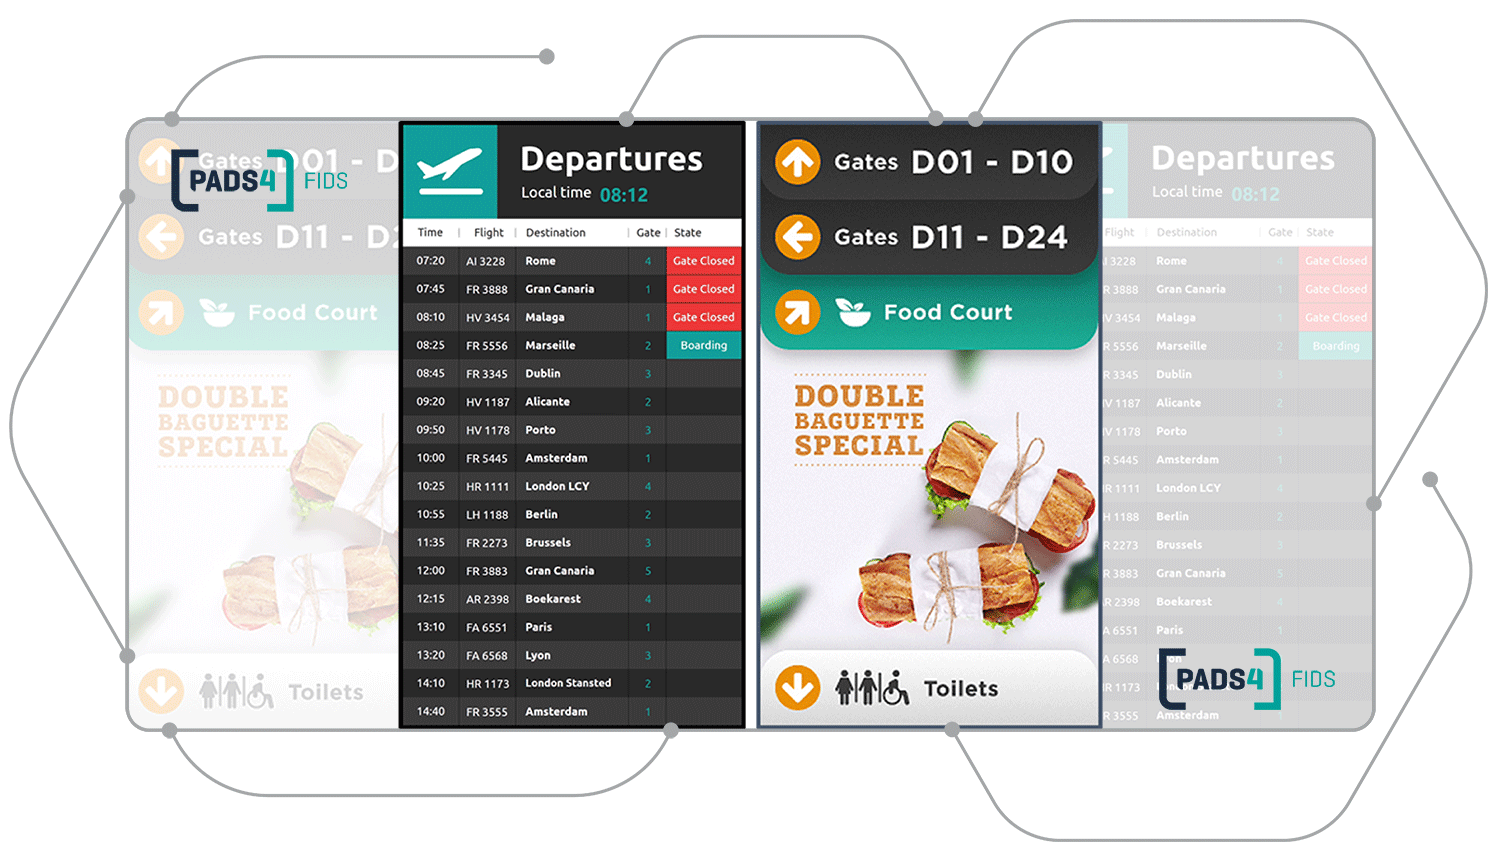 Screenshot from Azinq's Airport Hive AMS Product Flight Information Display System (FIDS) showing its clear display features for departures and other information